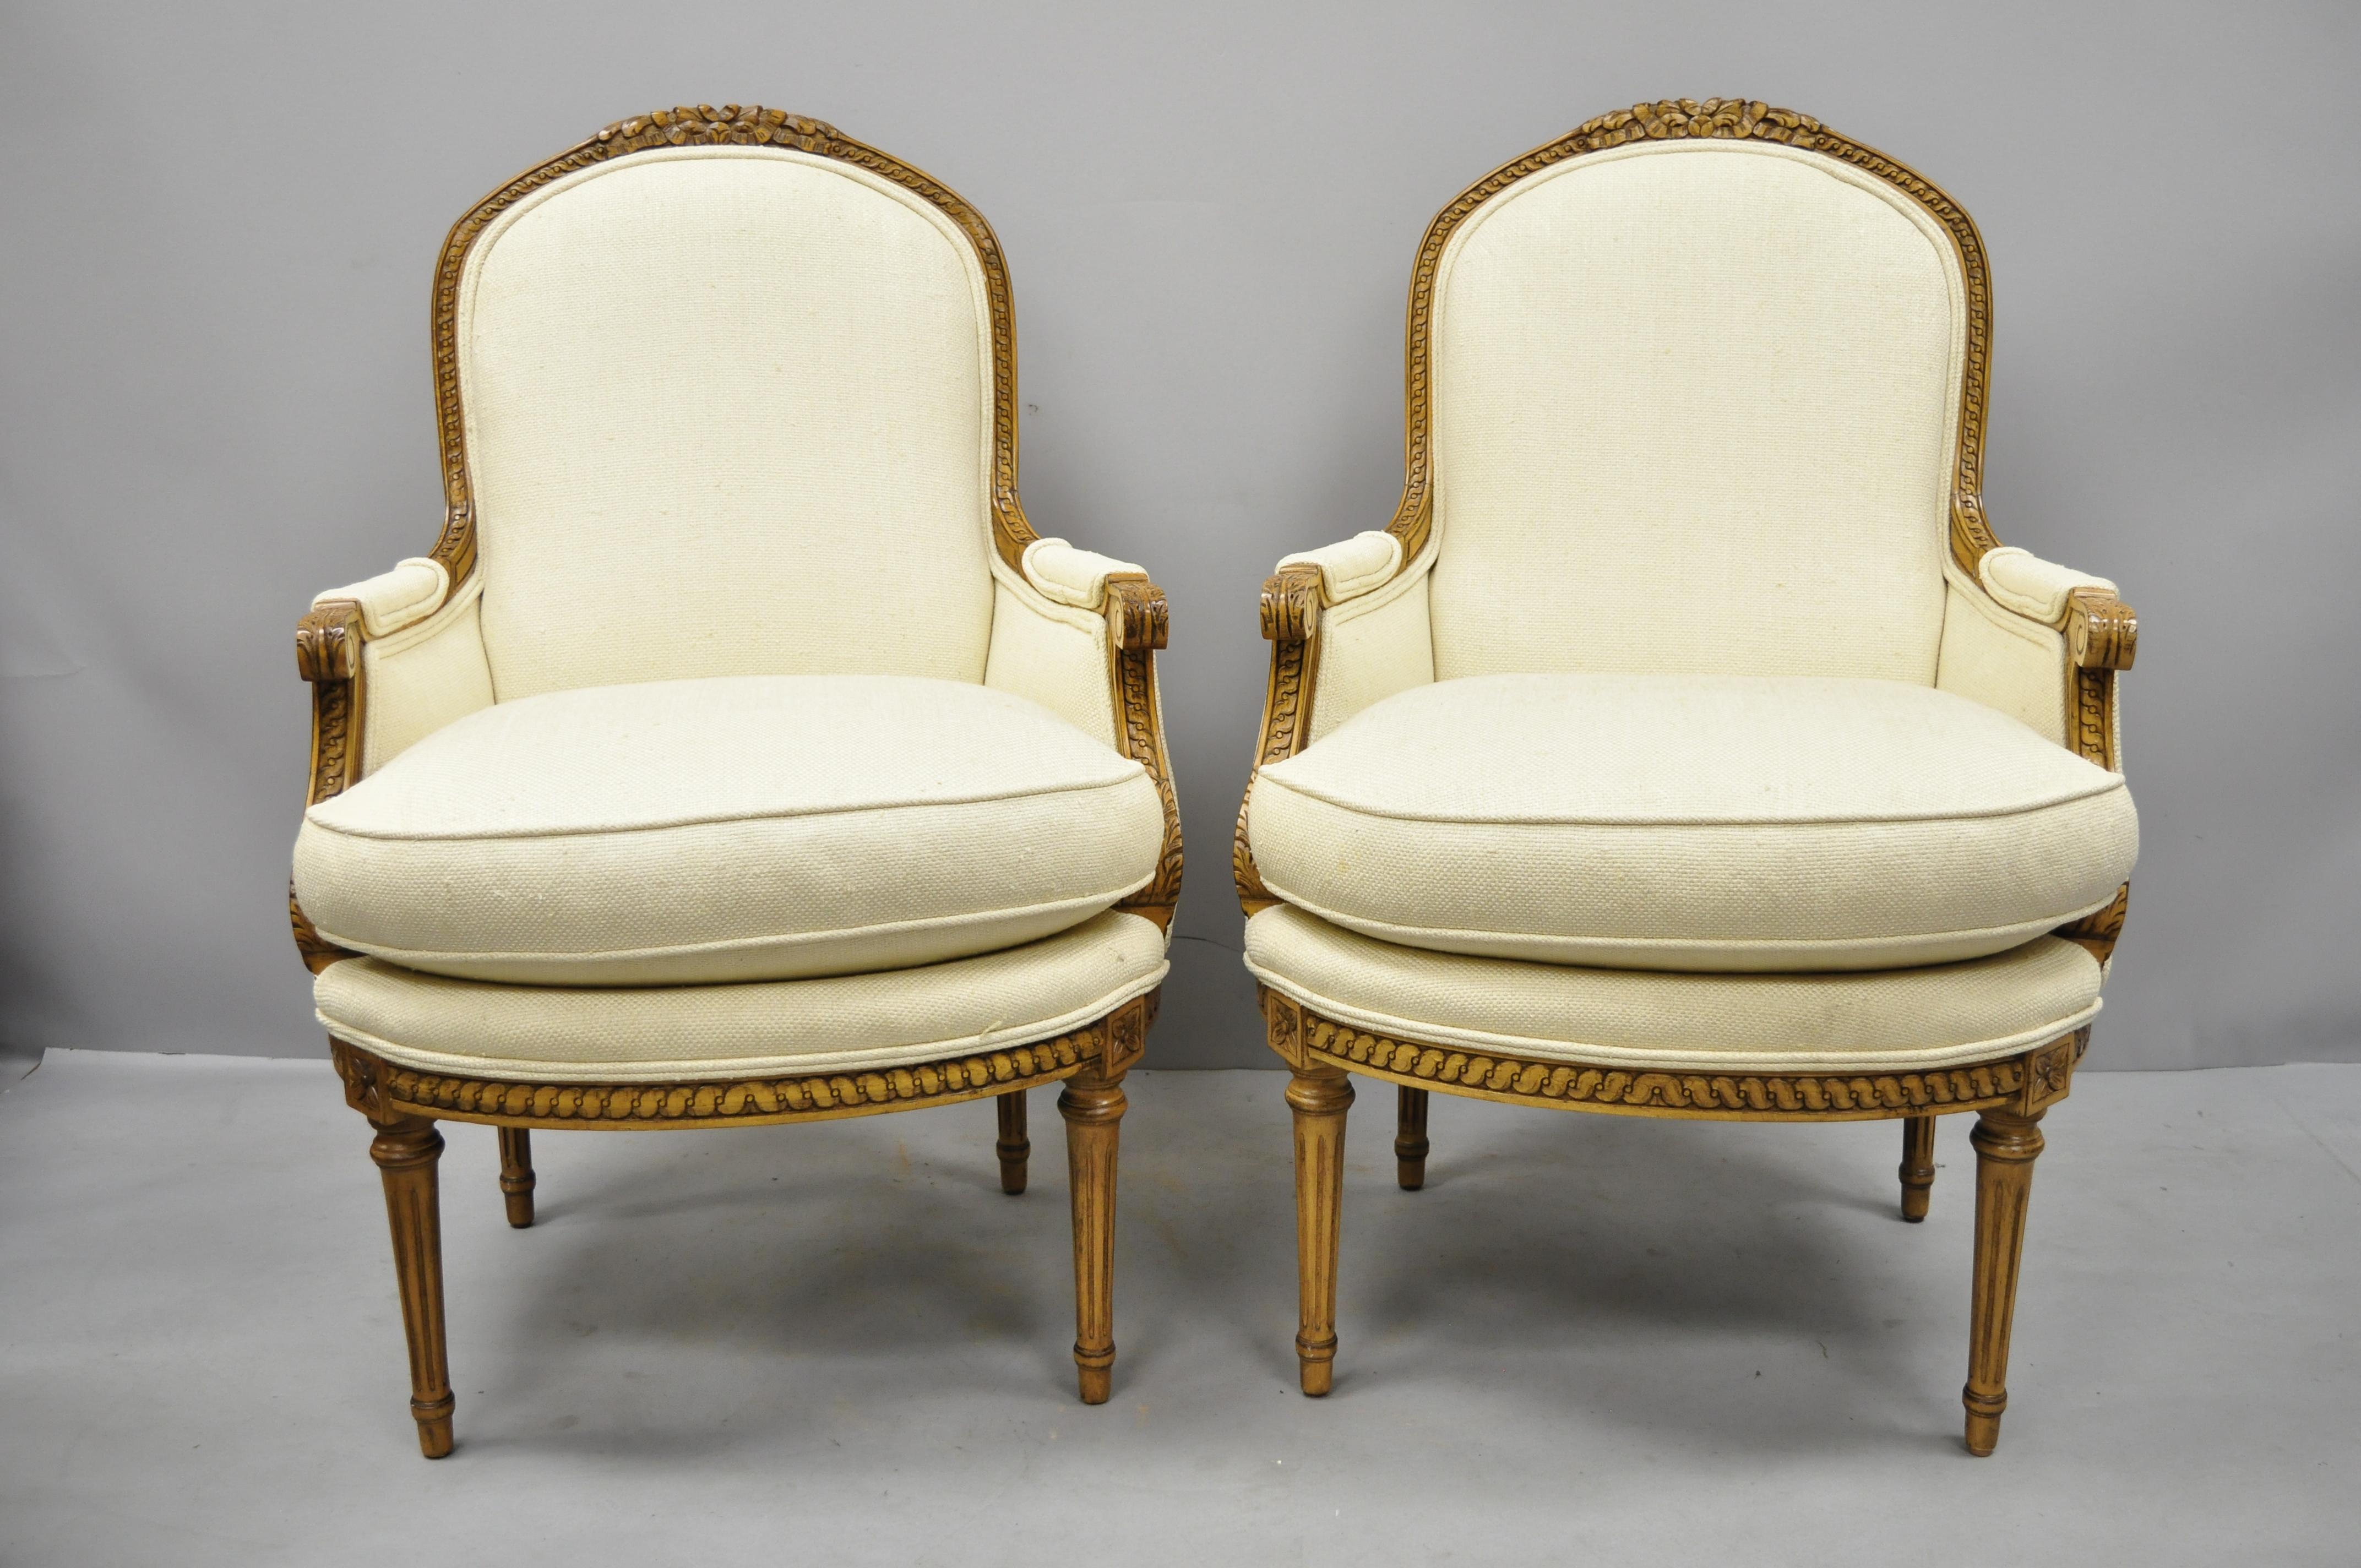 Pair of French Louis XVI style upholstered bergere armchairs by Greenbaum Interiors. Items feature tan burlap upholstery, solid wood construction, upholstered armrests, distressed finish, Serial number (H-309 chair), tapered legs, quality